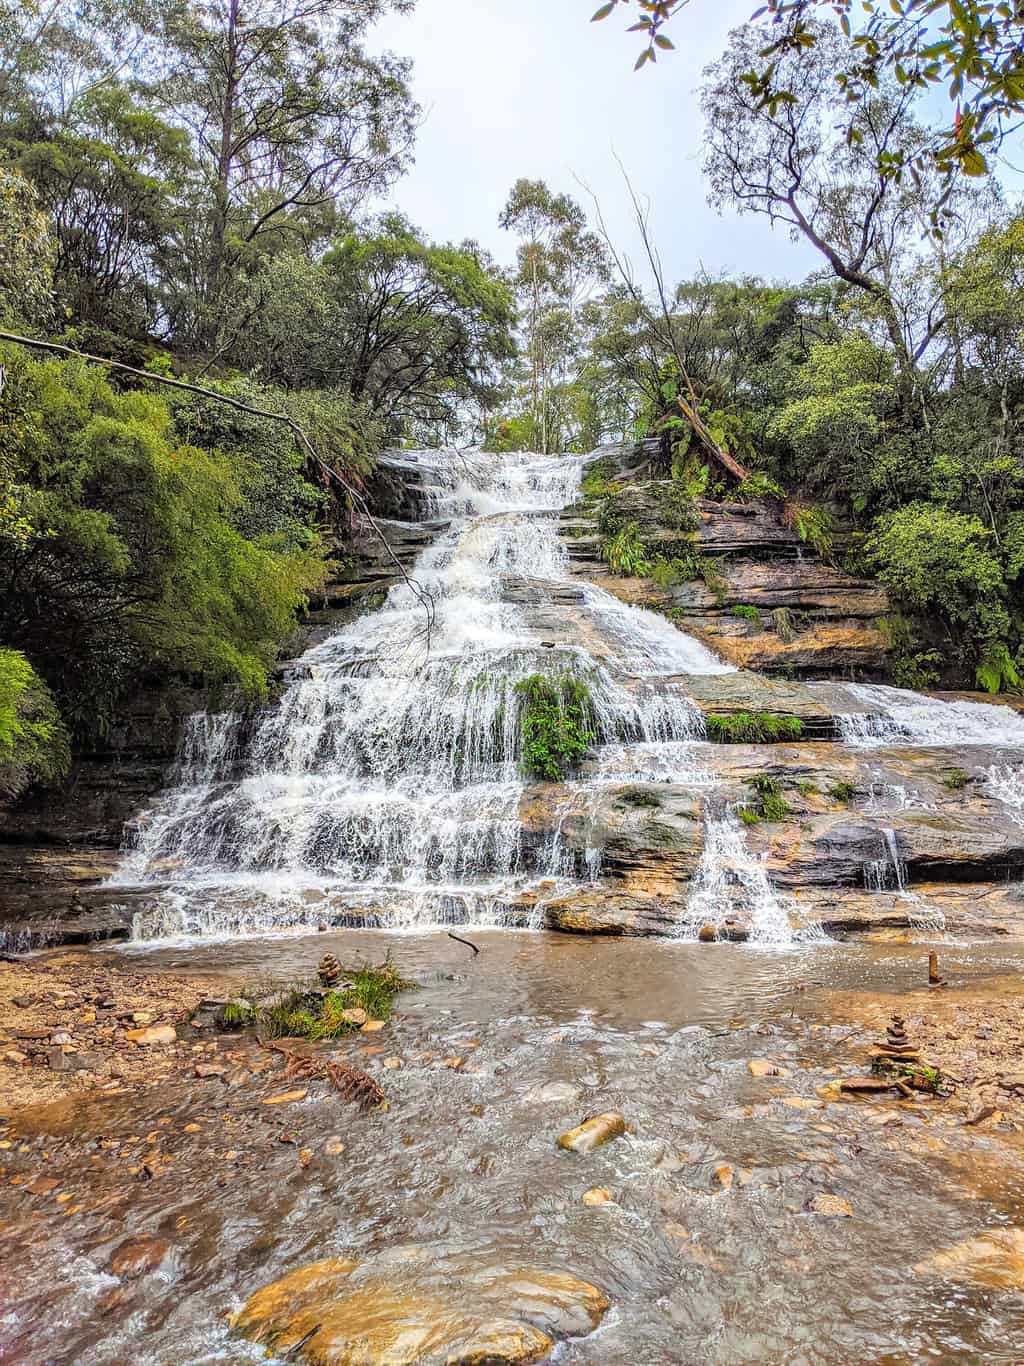 The Katoomba Cascades, in the Blue Mountains National Park